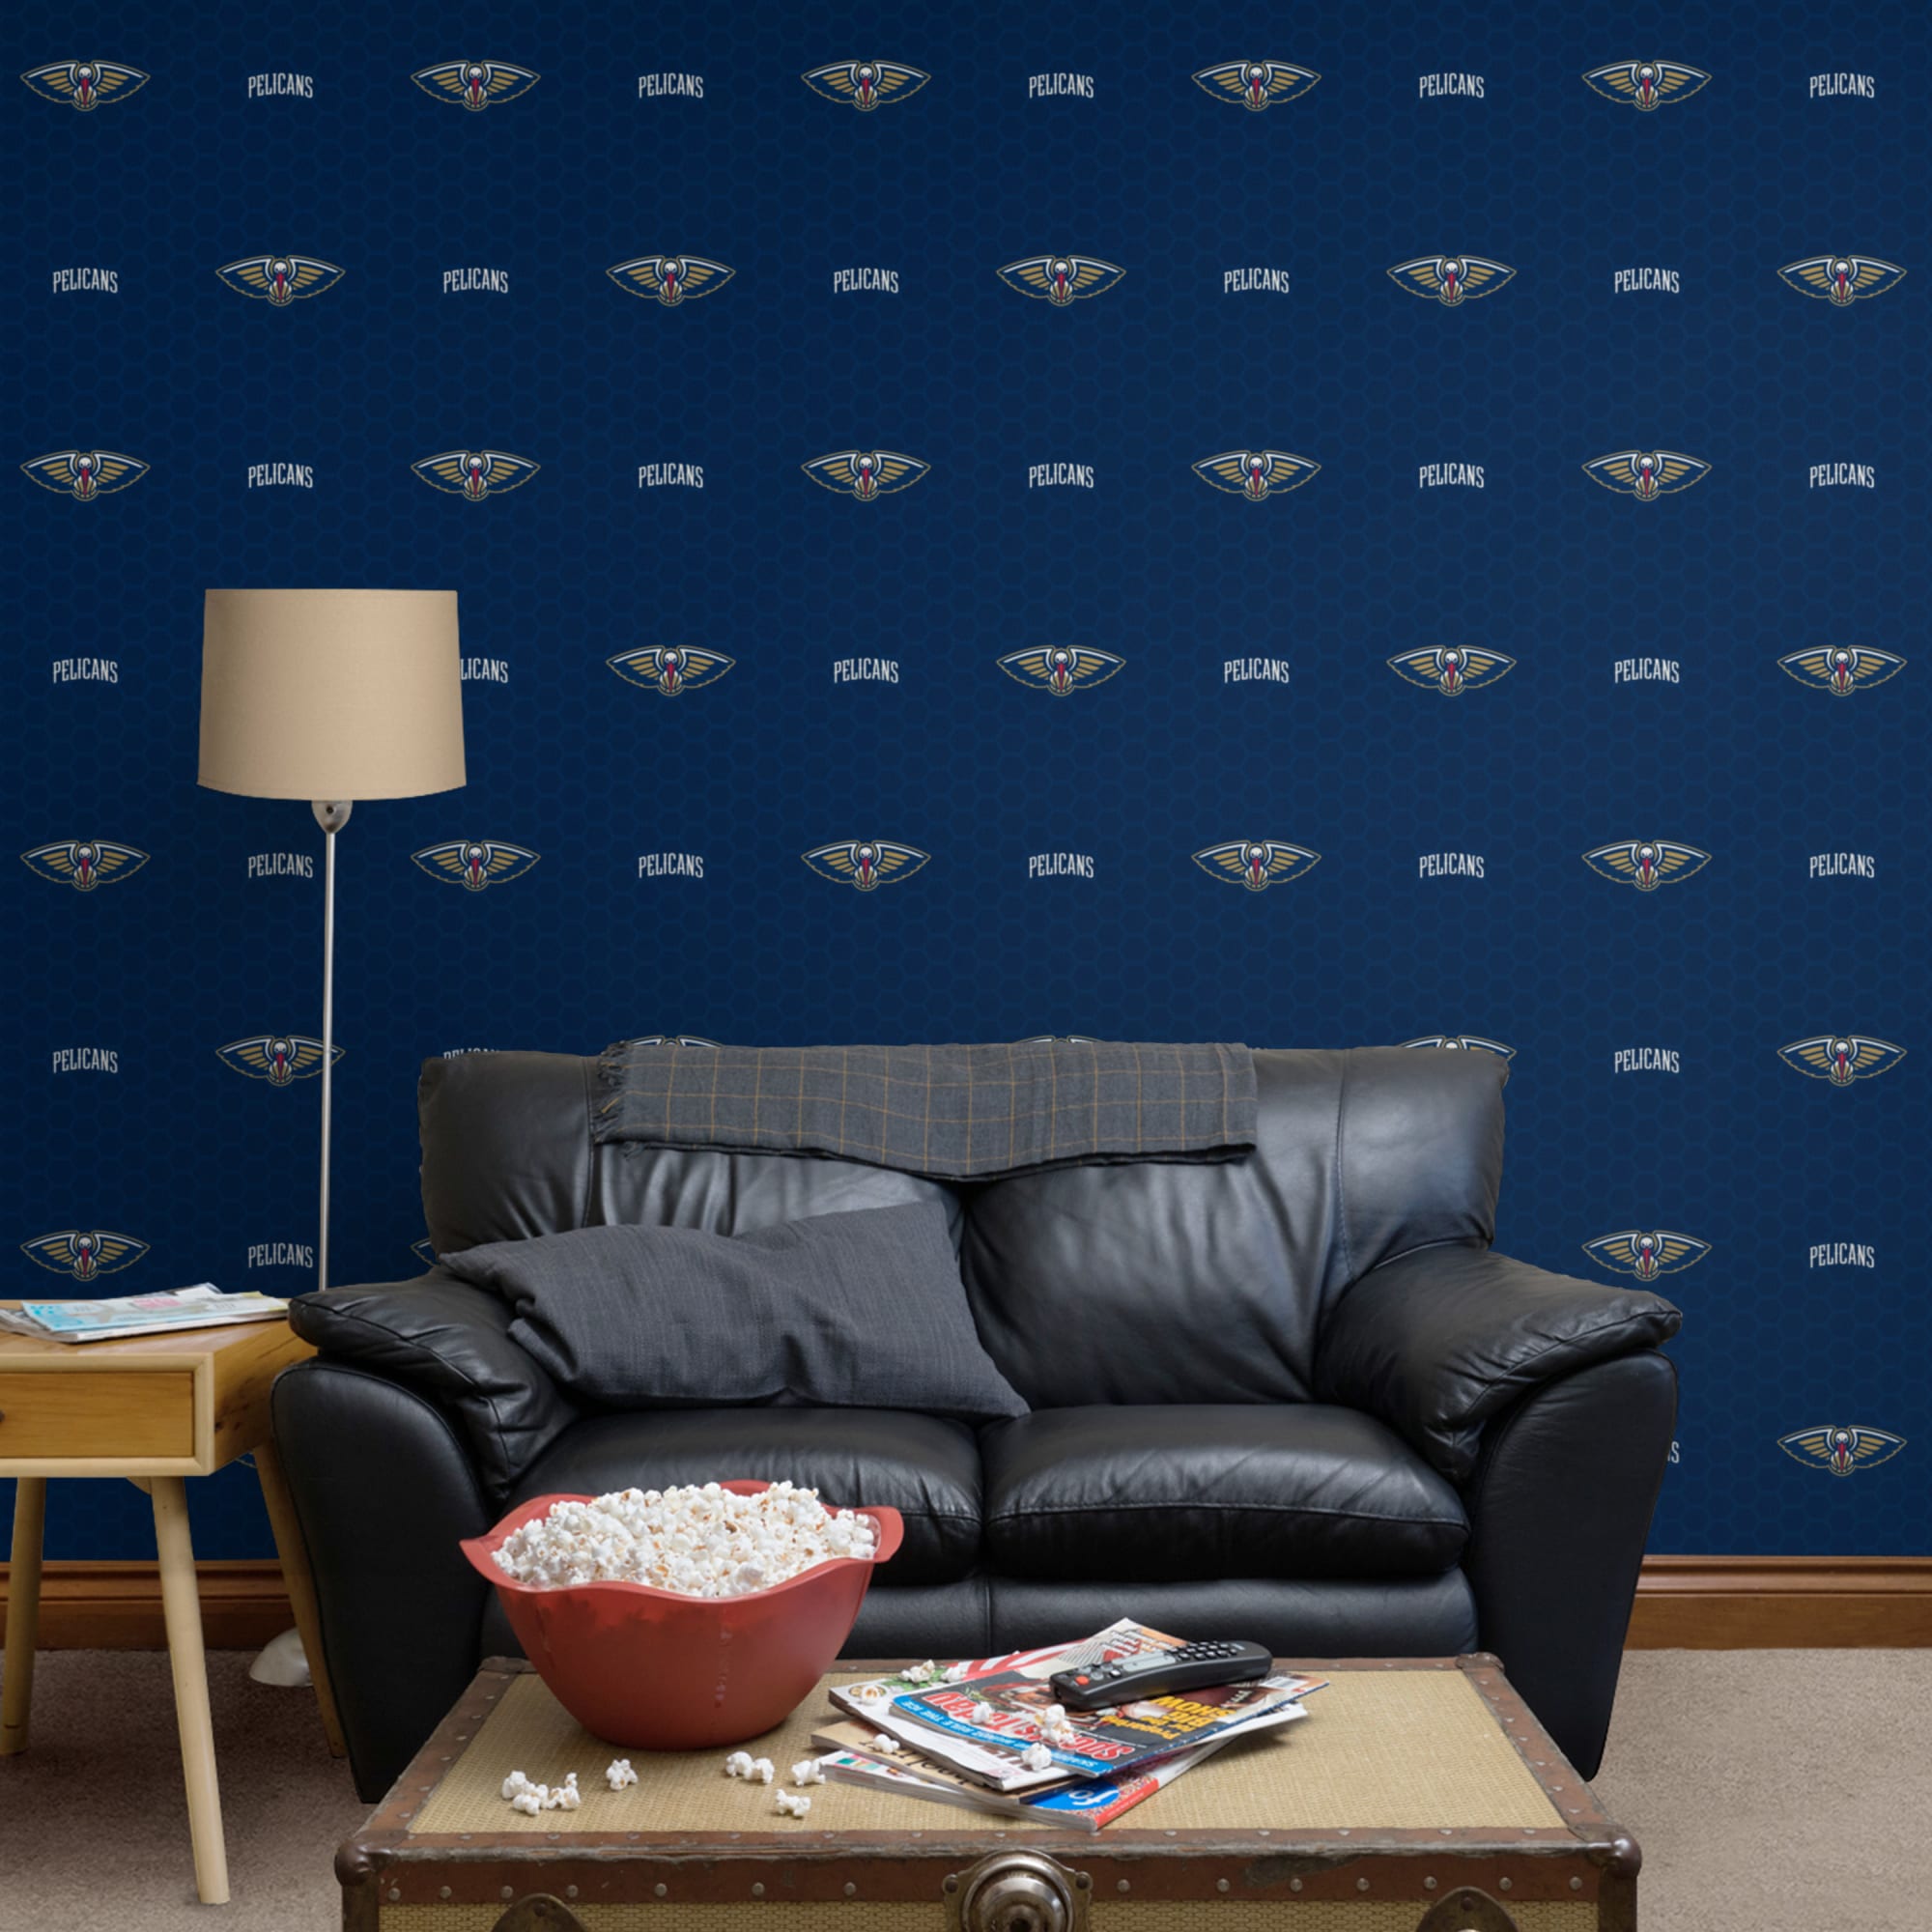 New Orleans Pelicans: Logo Pattern - Officially Licensed Removable Wallpaper 12" x 12" Sample by Fathead | 100% Vinyl